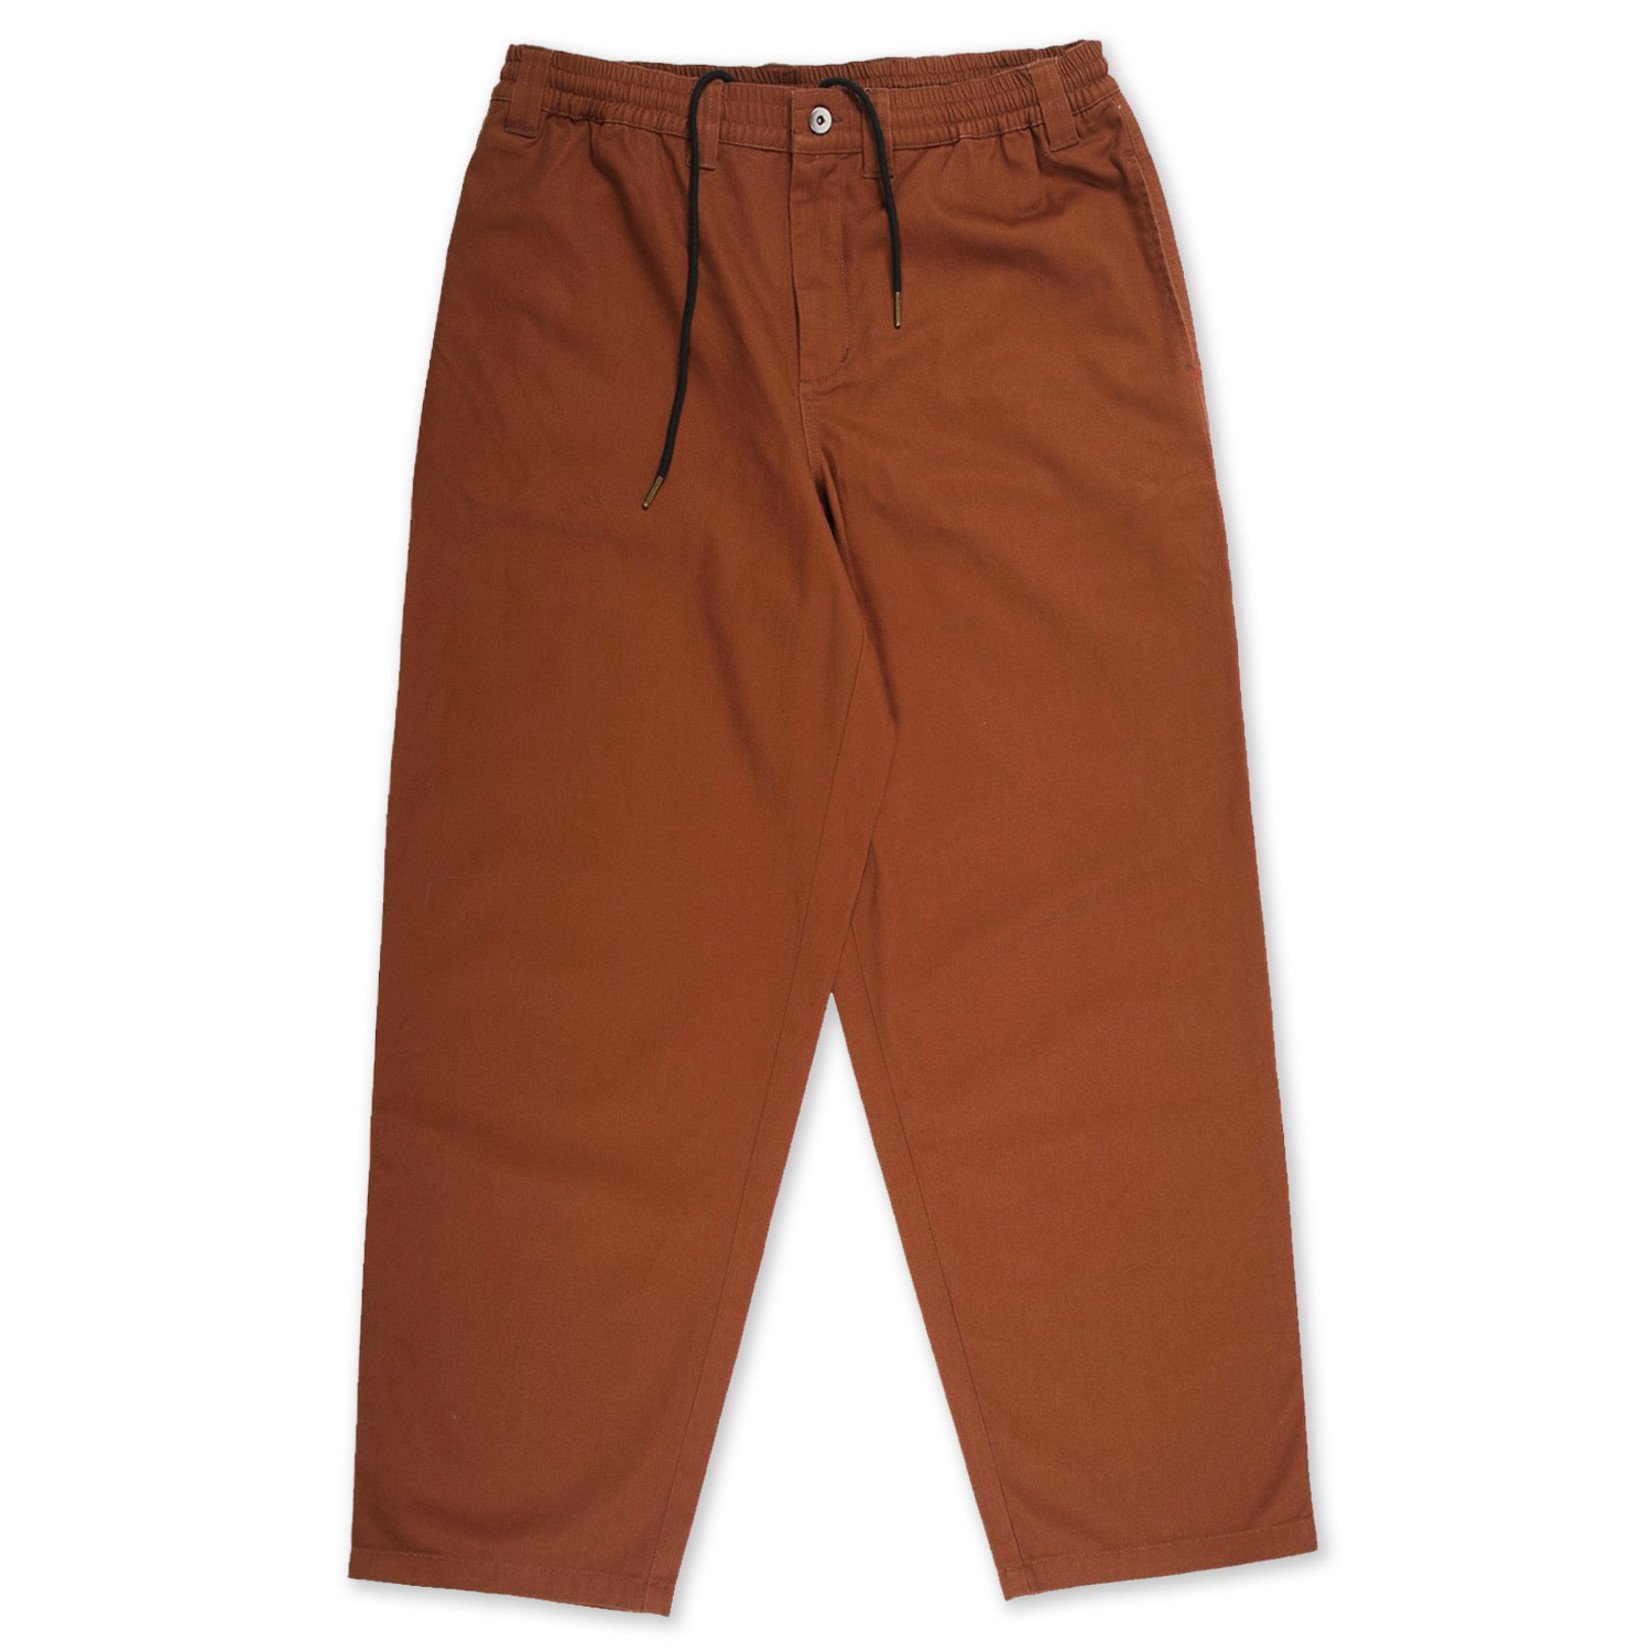 Theories Theories Stamp Lounge Pant - Rust